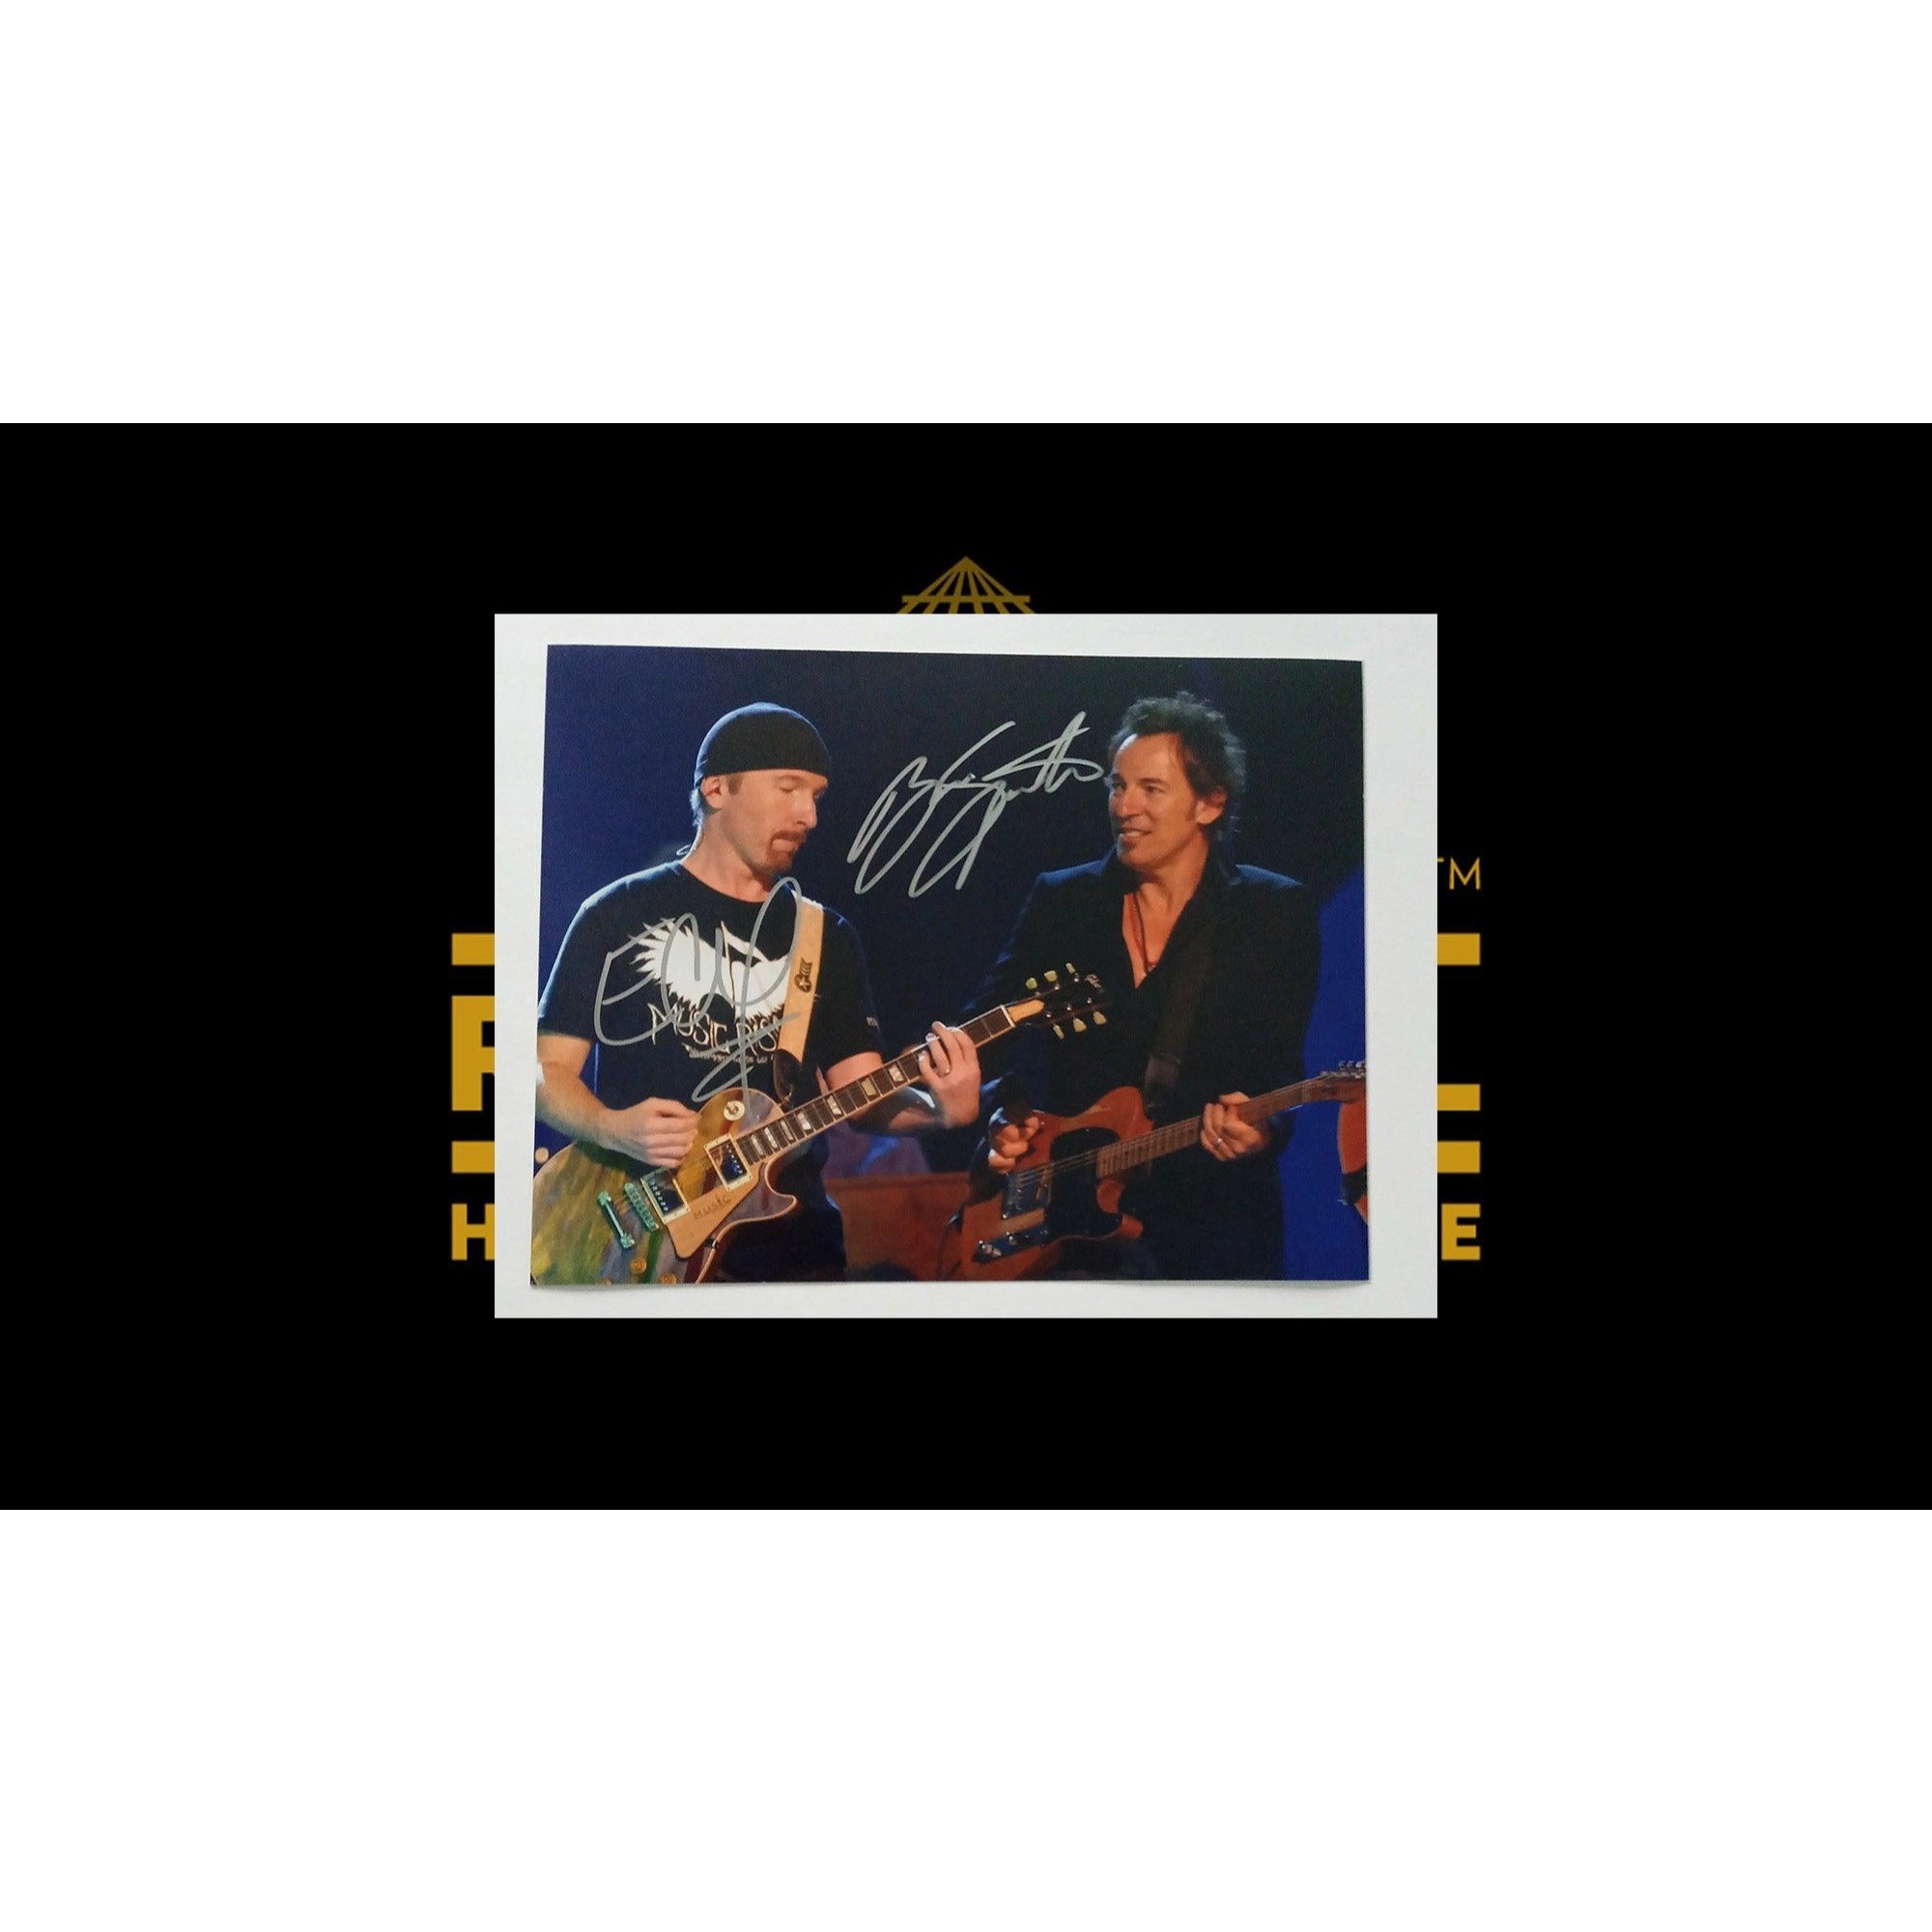 The Edge David Howell Evans and Bruce Springsteen 8 by 10 signed photo with proof